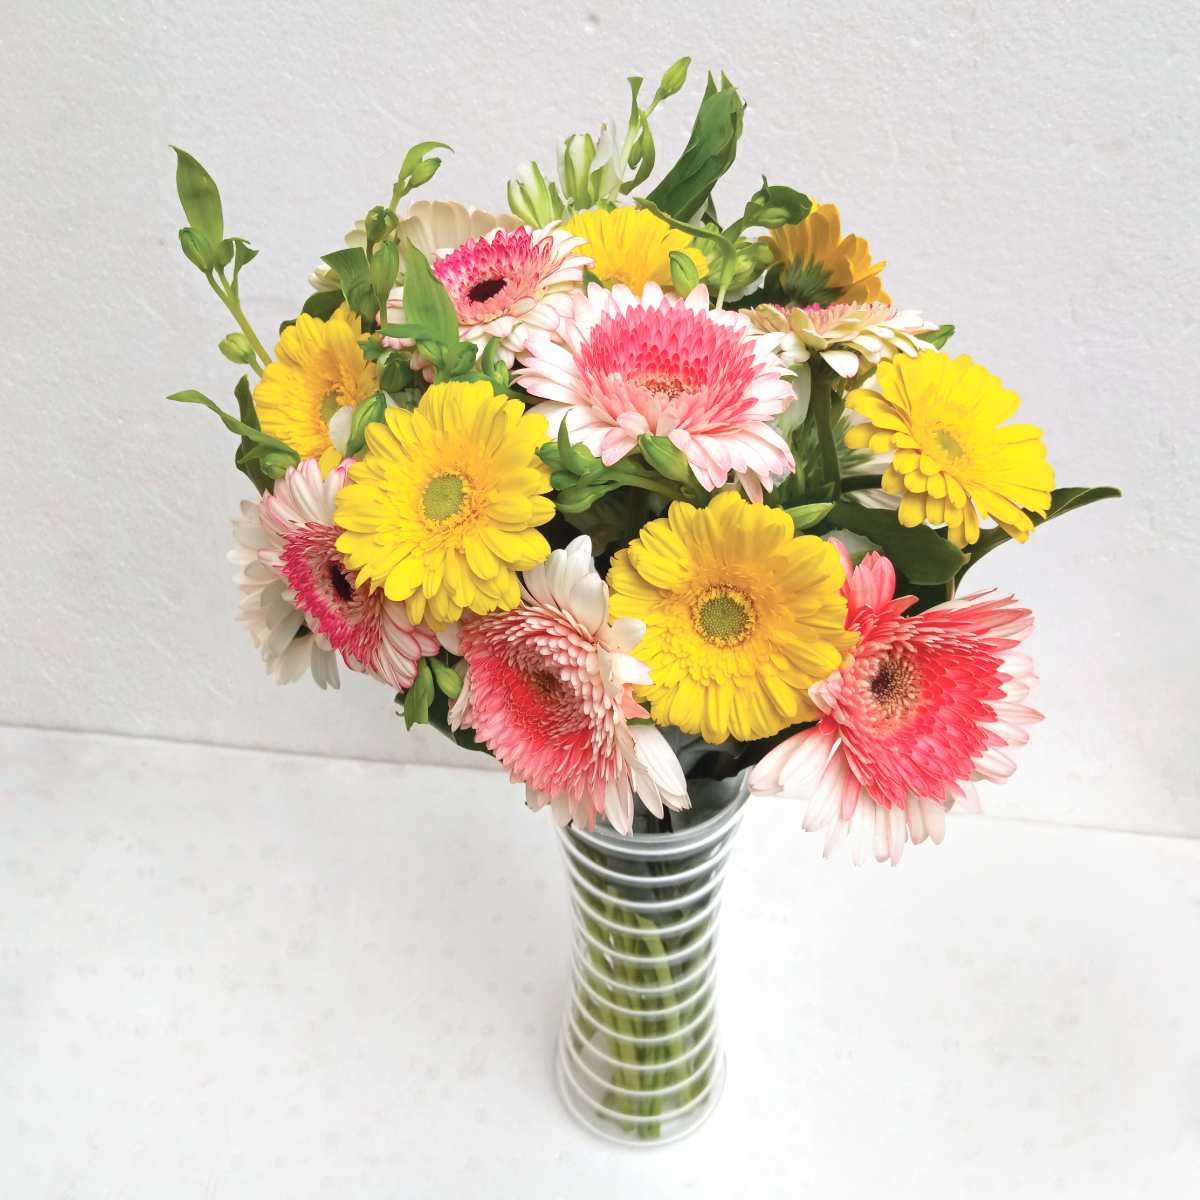 Sunshine Fantasy Vase Flower Arrangement by Simona Flowers Kenya. Prepared with vibrant Gaberas flowers perfect to put a smile on a friend's face and a loved ones face on any day.